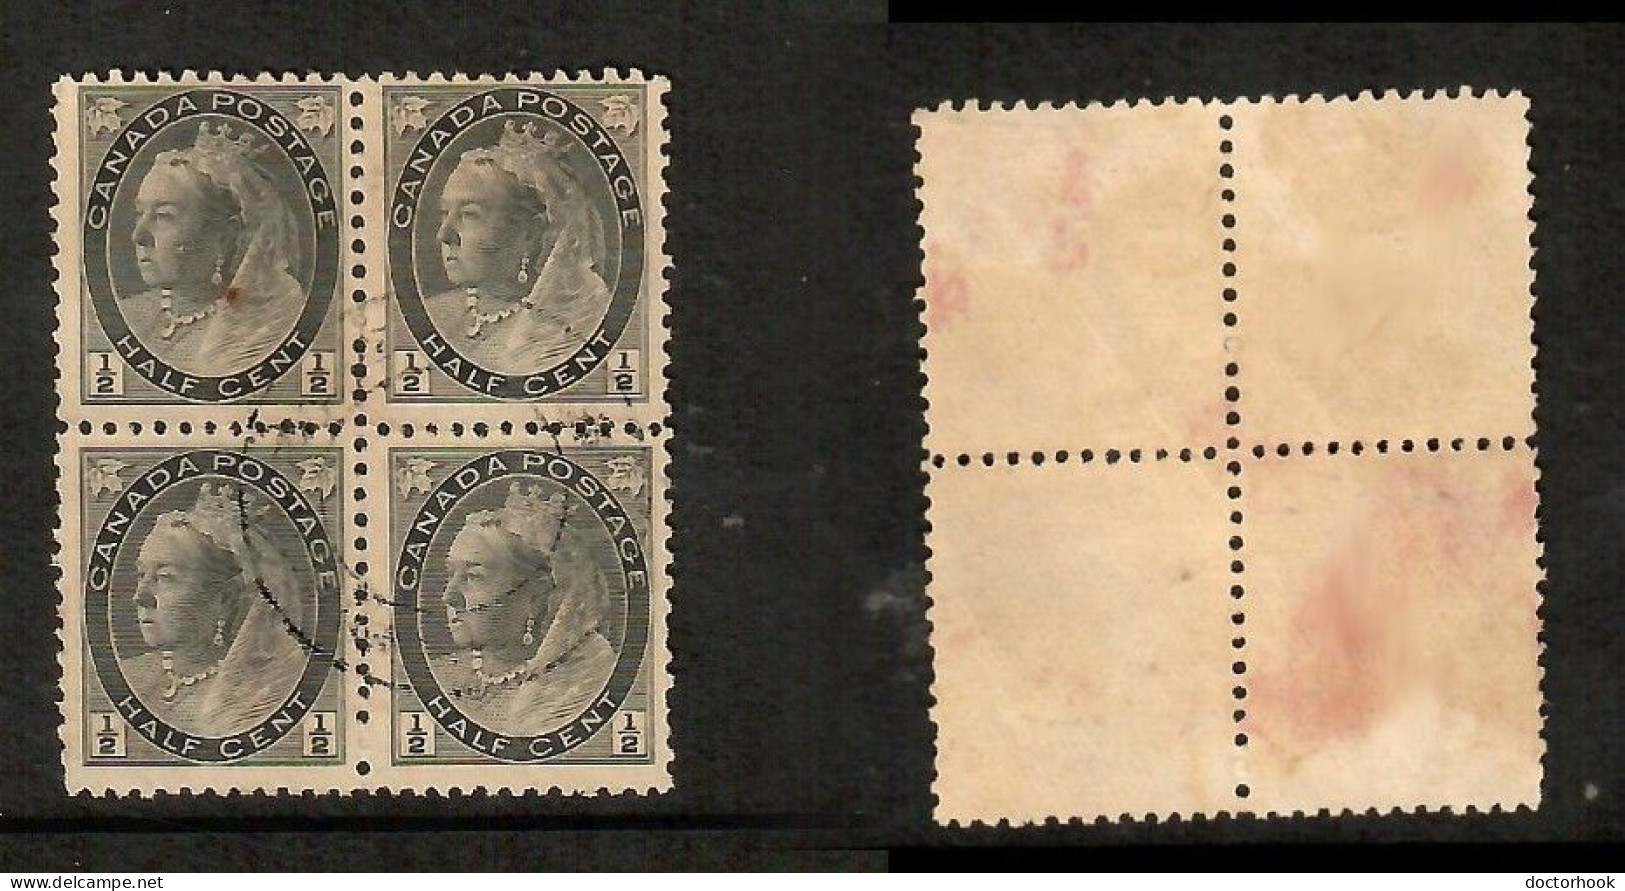 CANADA   Scott # 74 USED BLOCK Of 4 (CONDITION AS PER SCAN) (CAN-204) - Hojas Bloque